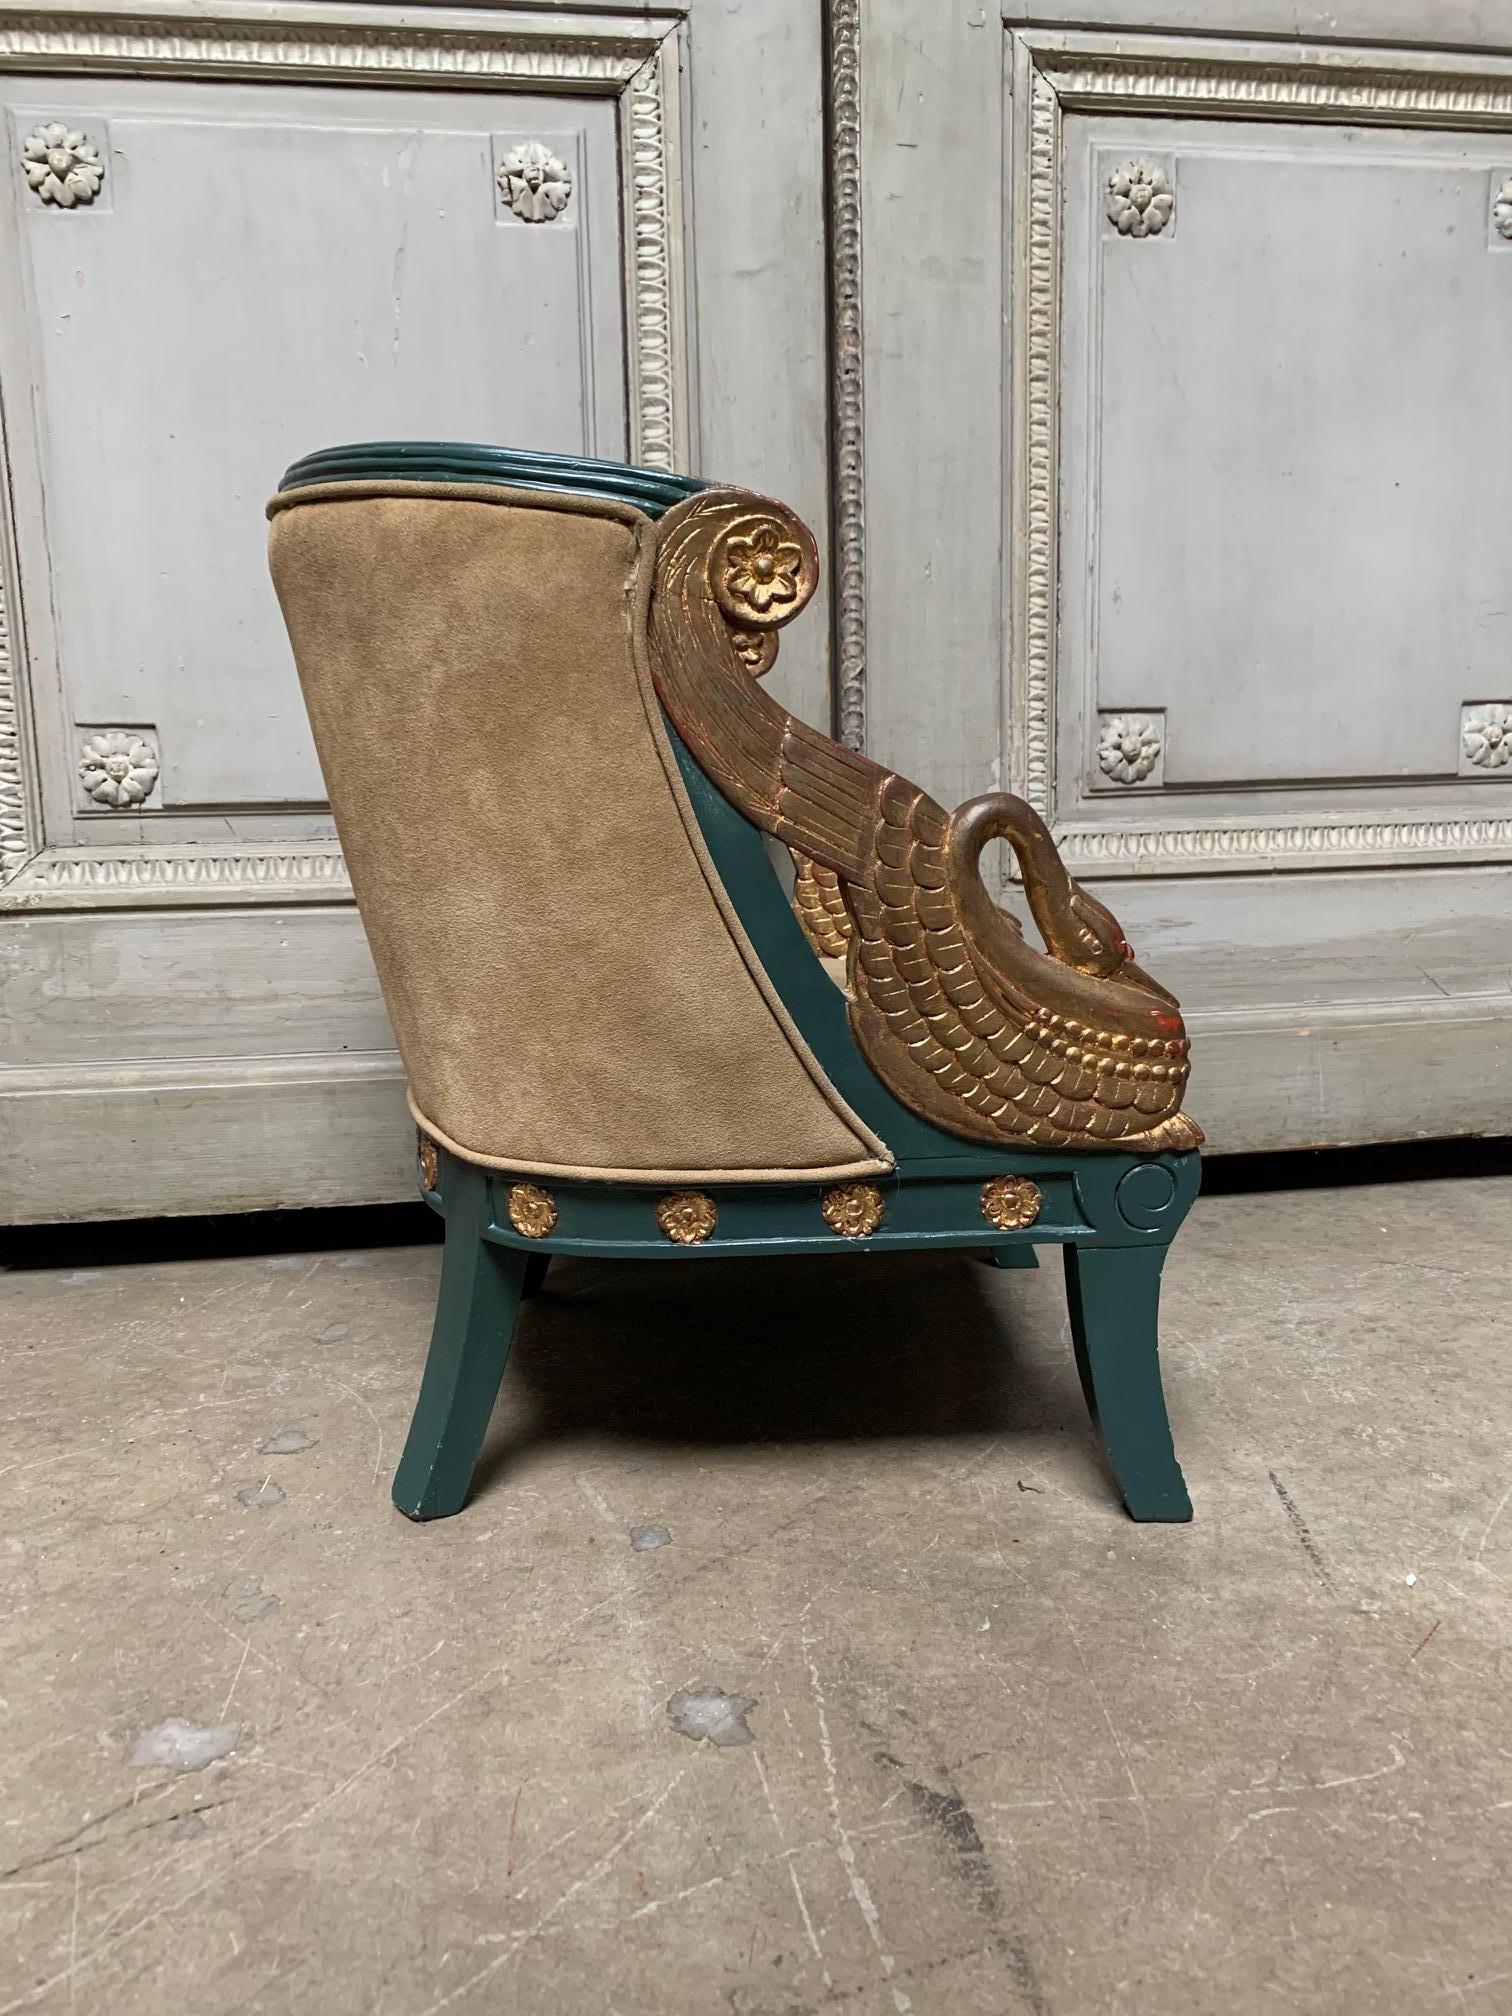 This charming diminutive French Empire style child’s chair is painted in teal blue and gold and features beautifully carved swans as arms and rosettes throughout the apron.